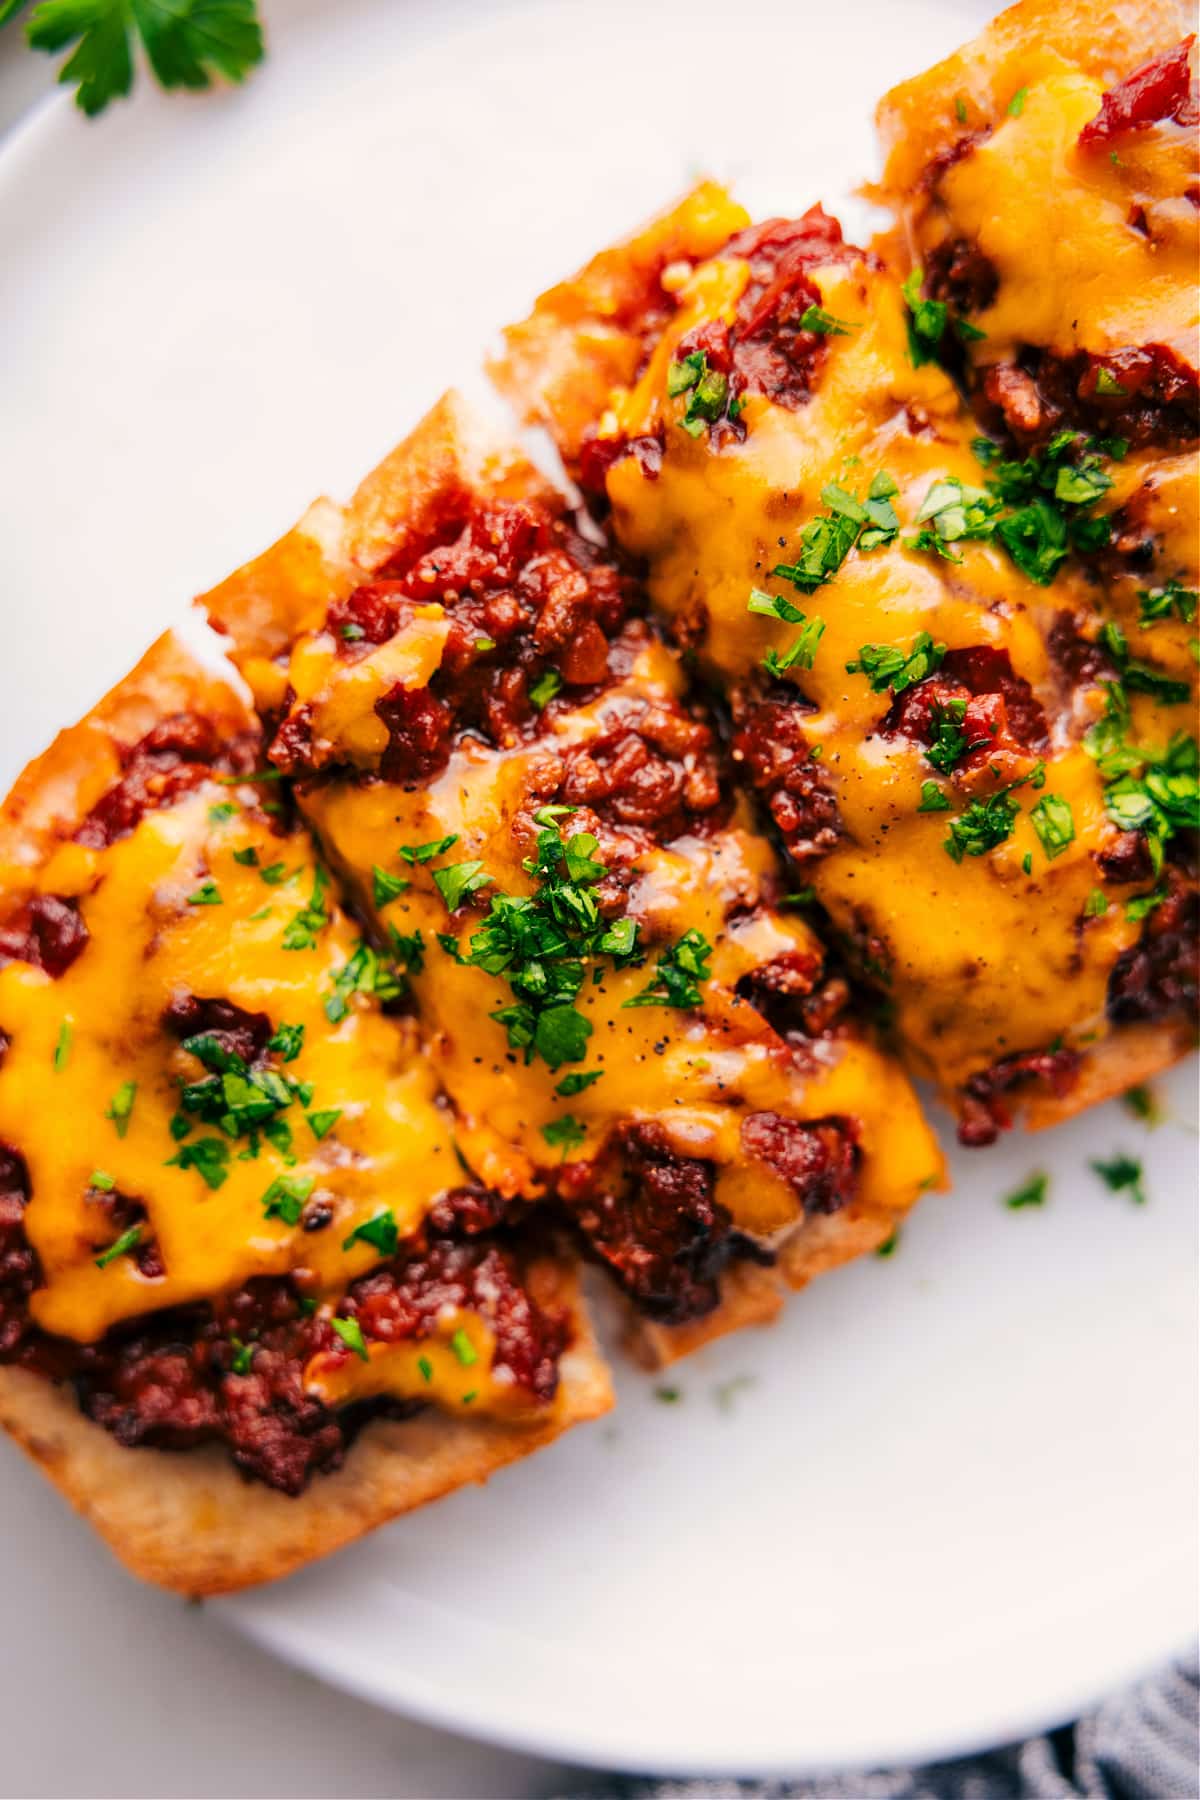 Slices of Sloppy Joe Pizzas on a plate.